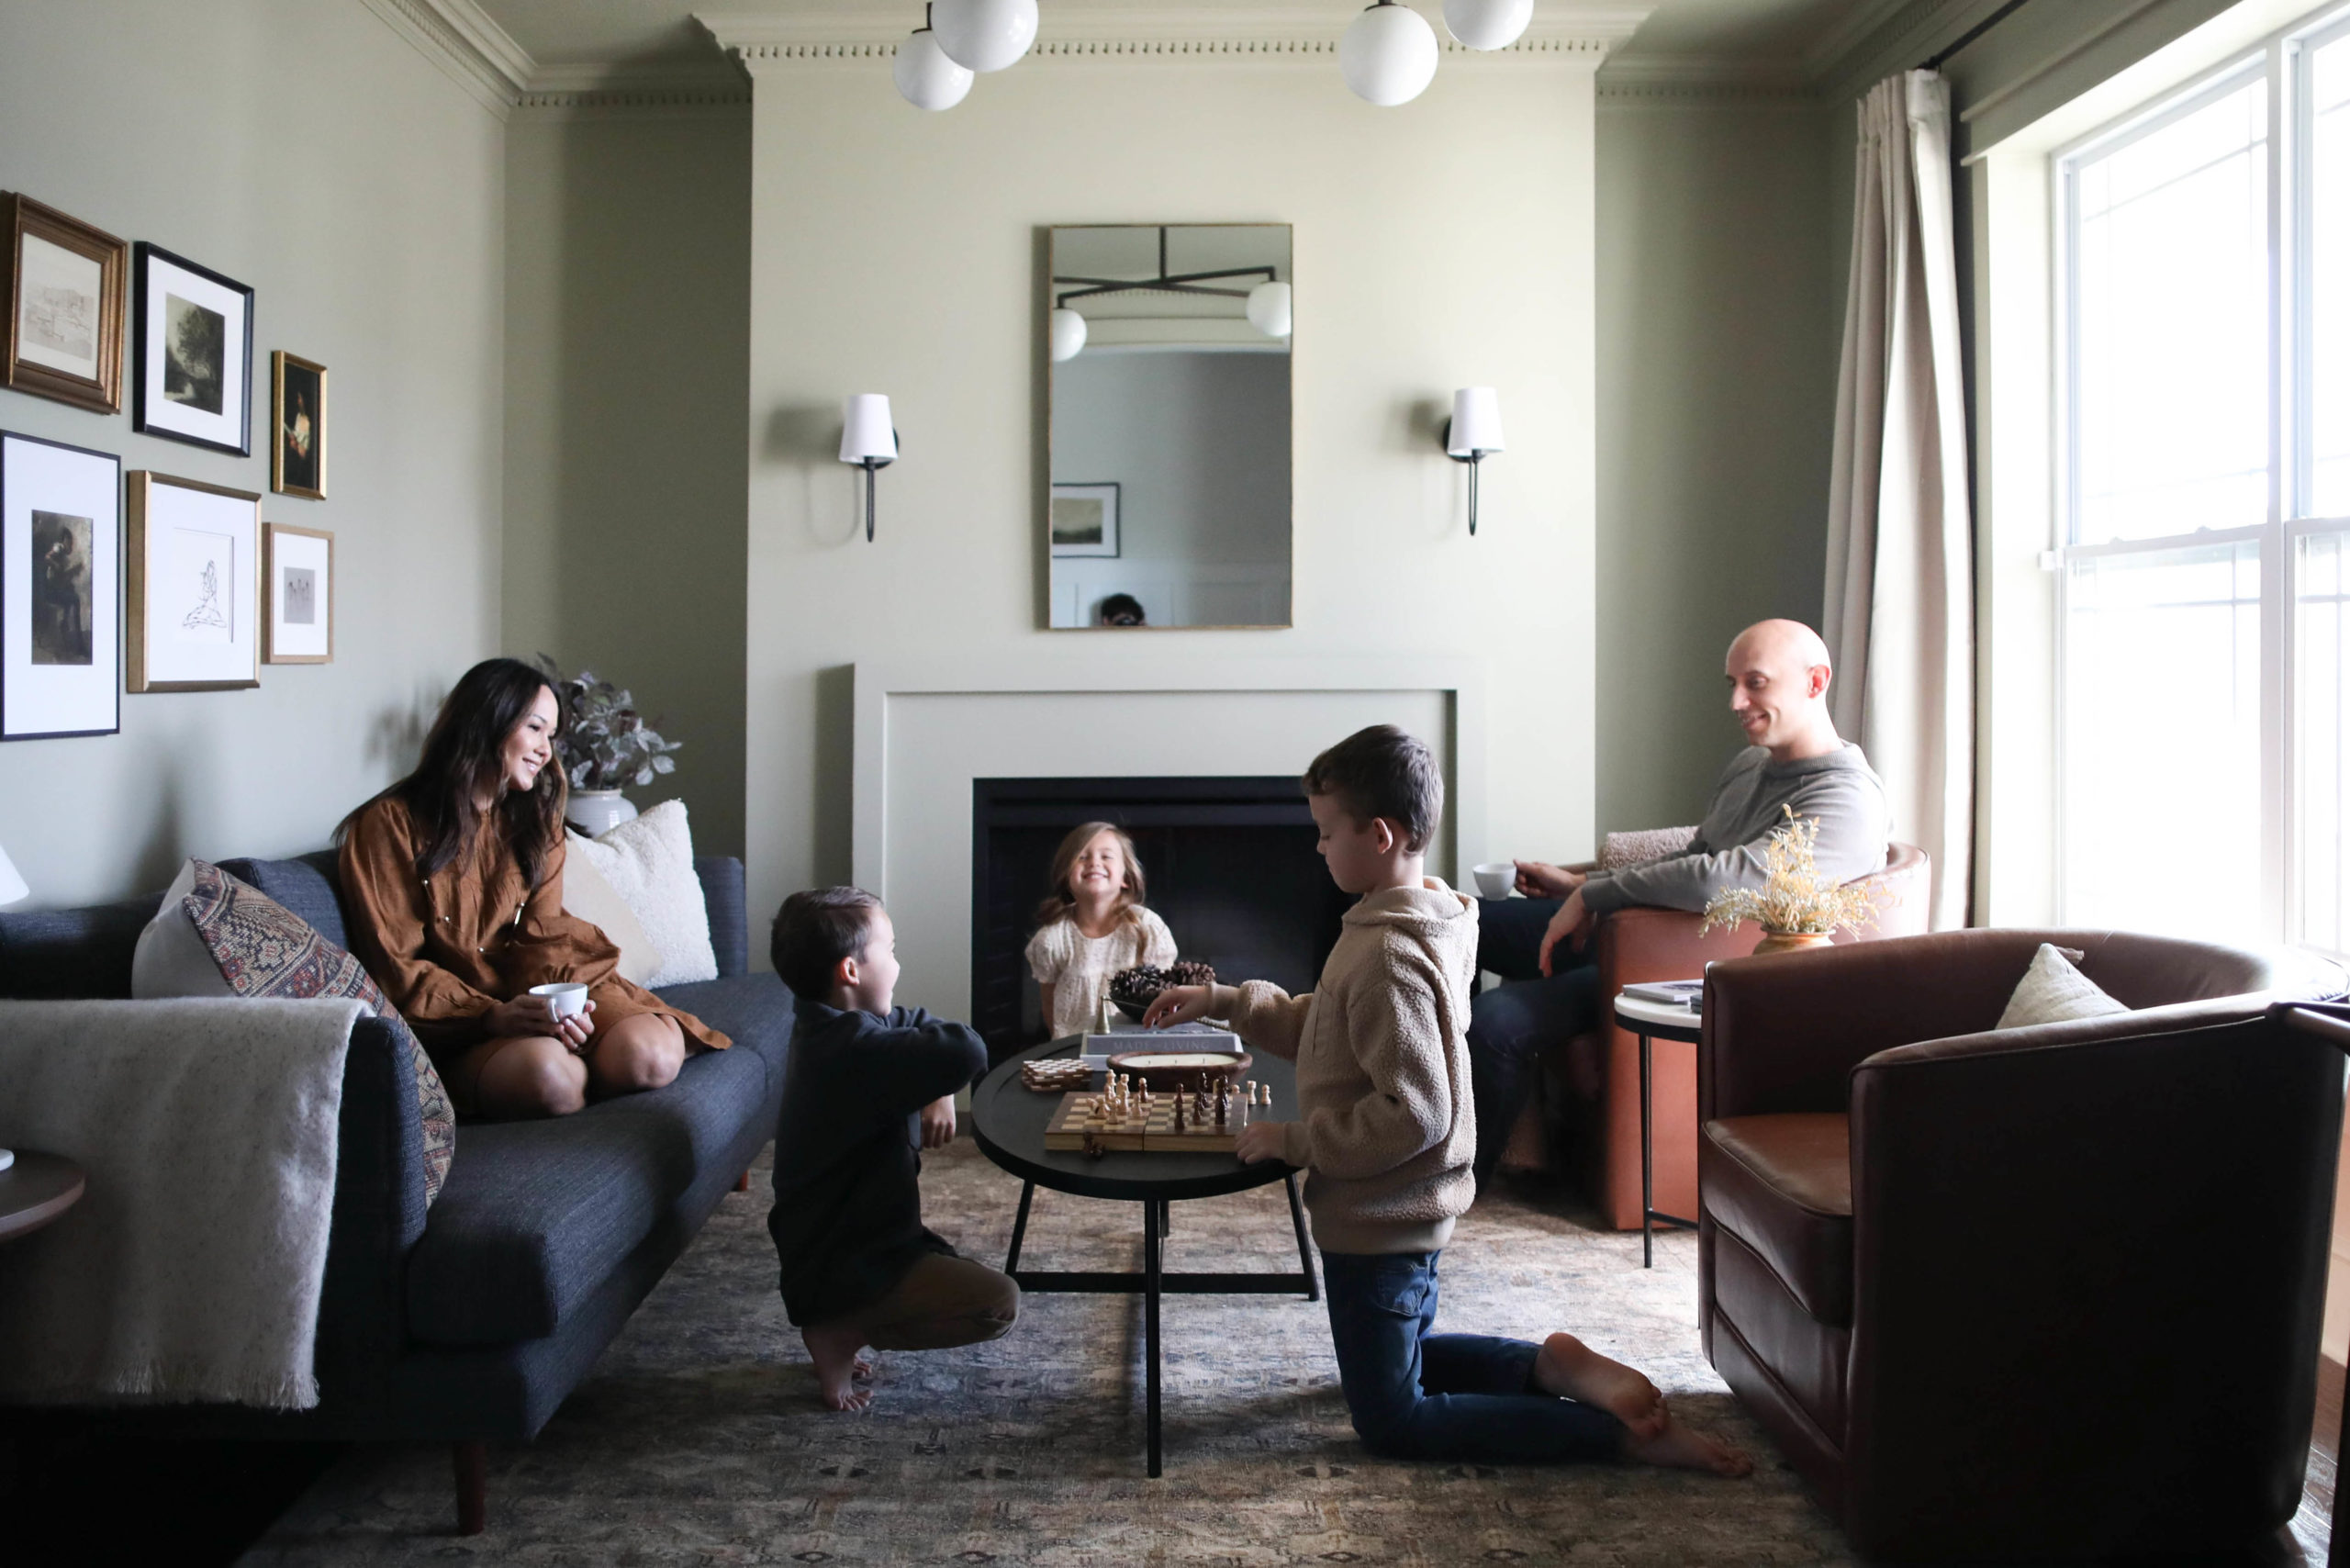 mrsjessicadarling, her husband and three kids are hanging out in their muted green space. The boys are playing chess, the little girl is smiling playfully on the ground, while Jessica and Jeff are smiling and enjoying coffee on a sofa and accent chair.